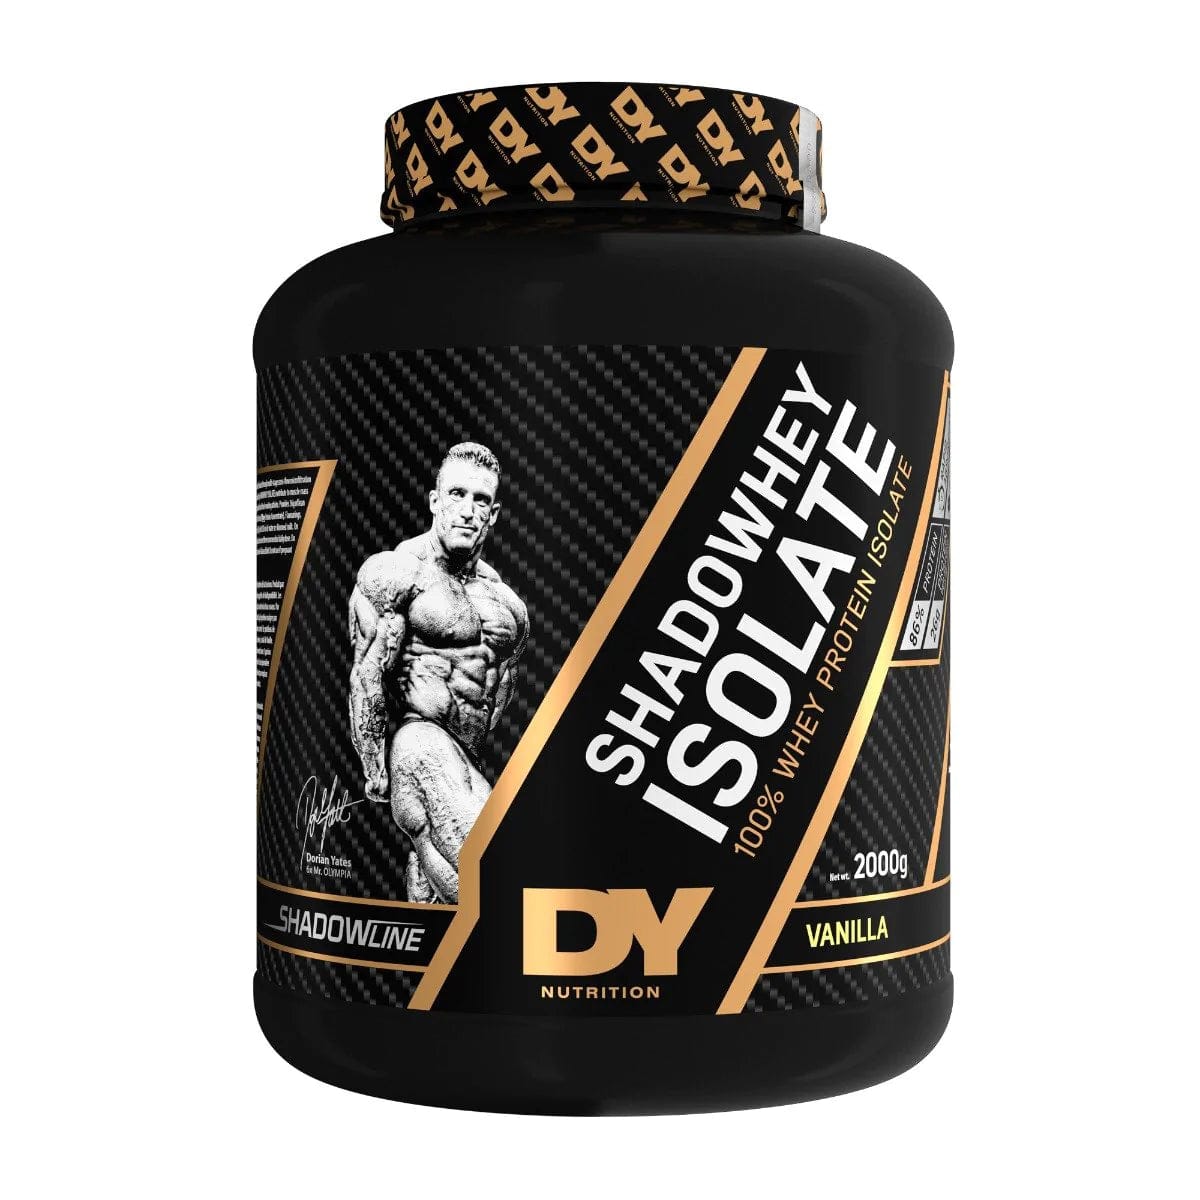 DY NutritionShadowhey IsolateWhey Protein IsolateRED SUPPS